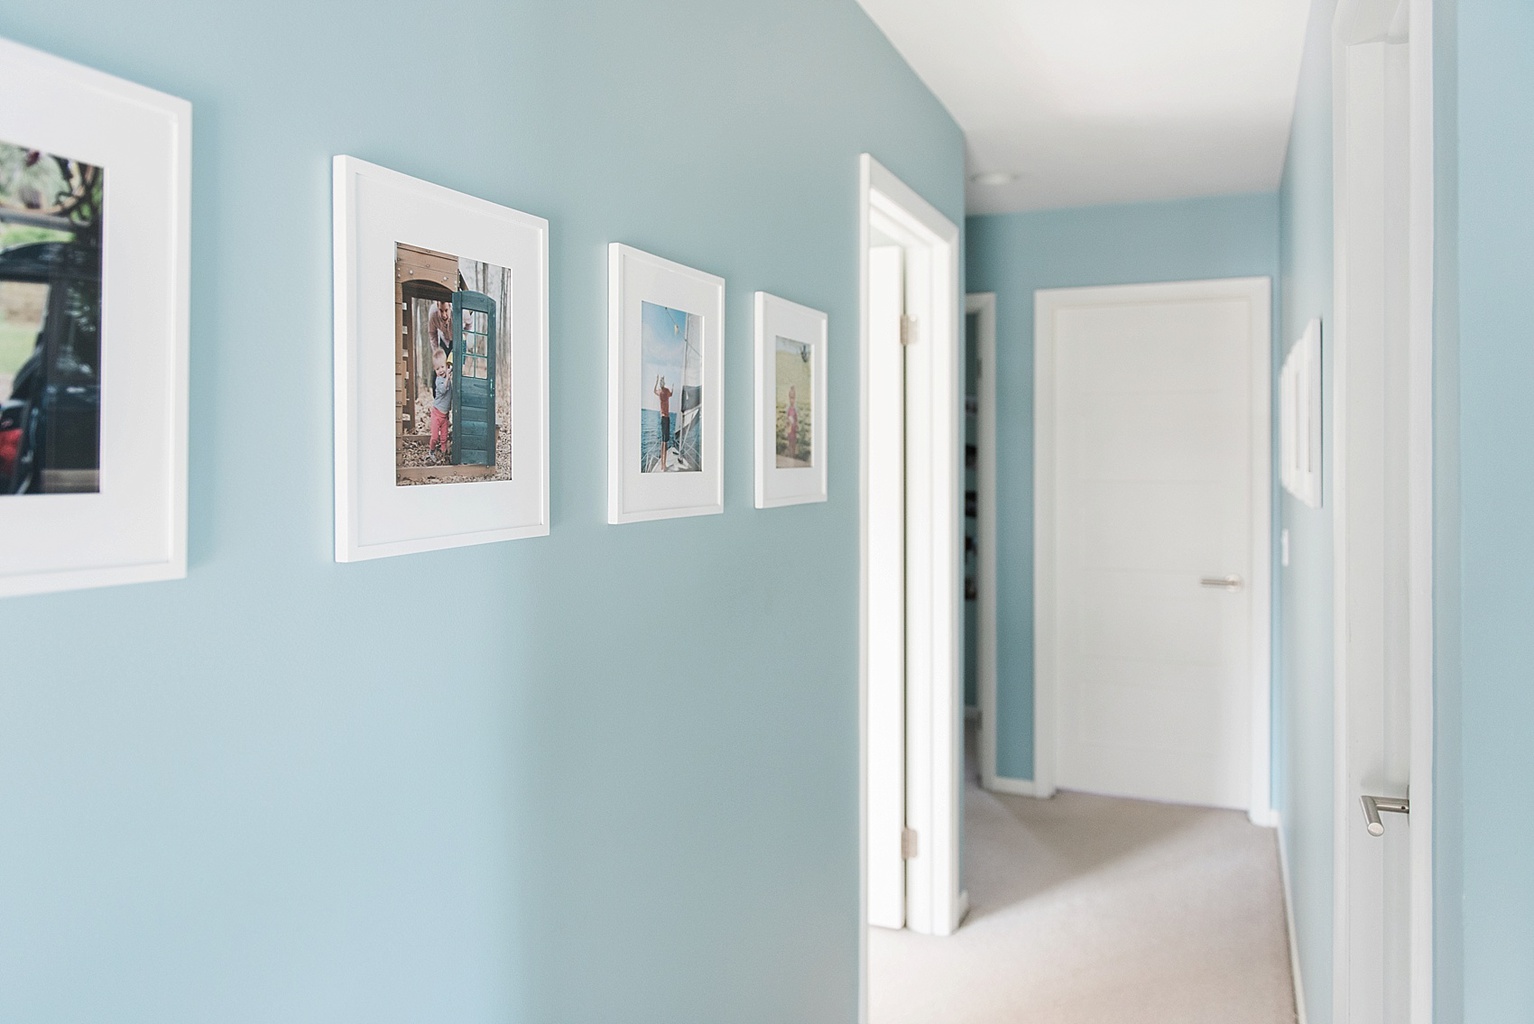 Styling photos at home: frames